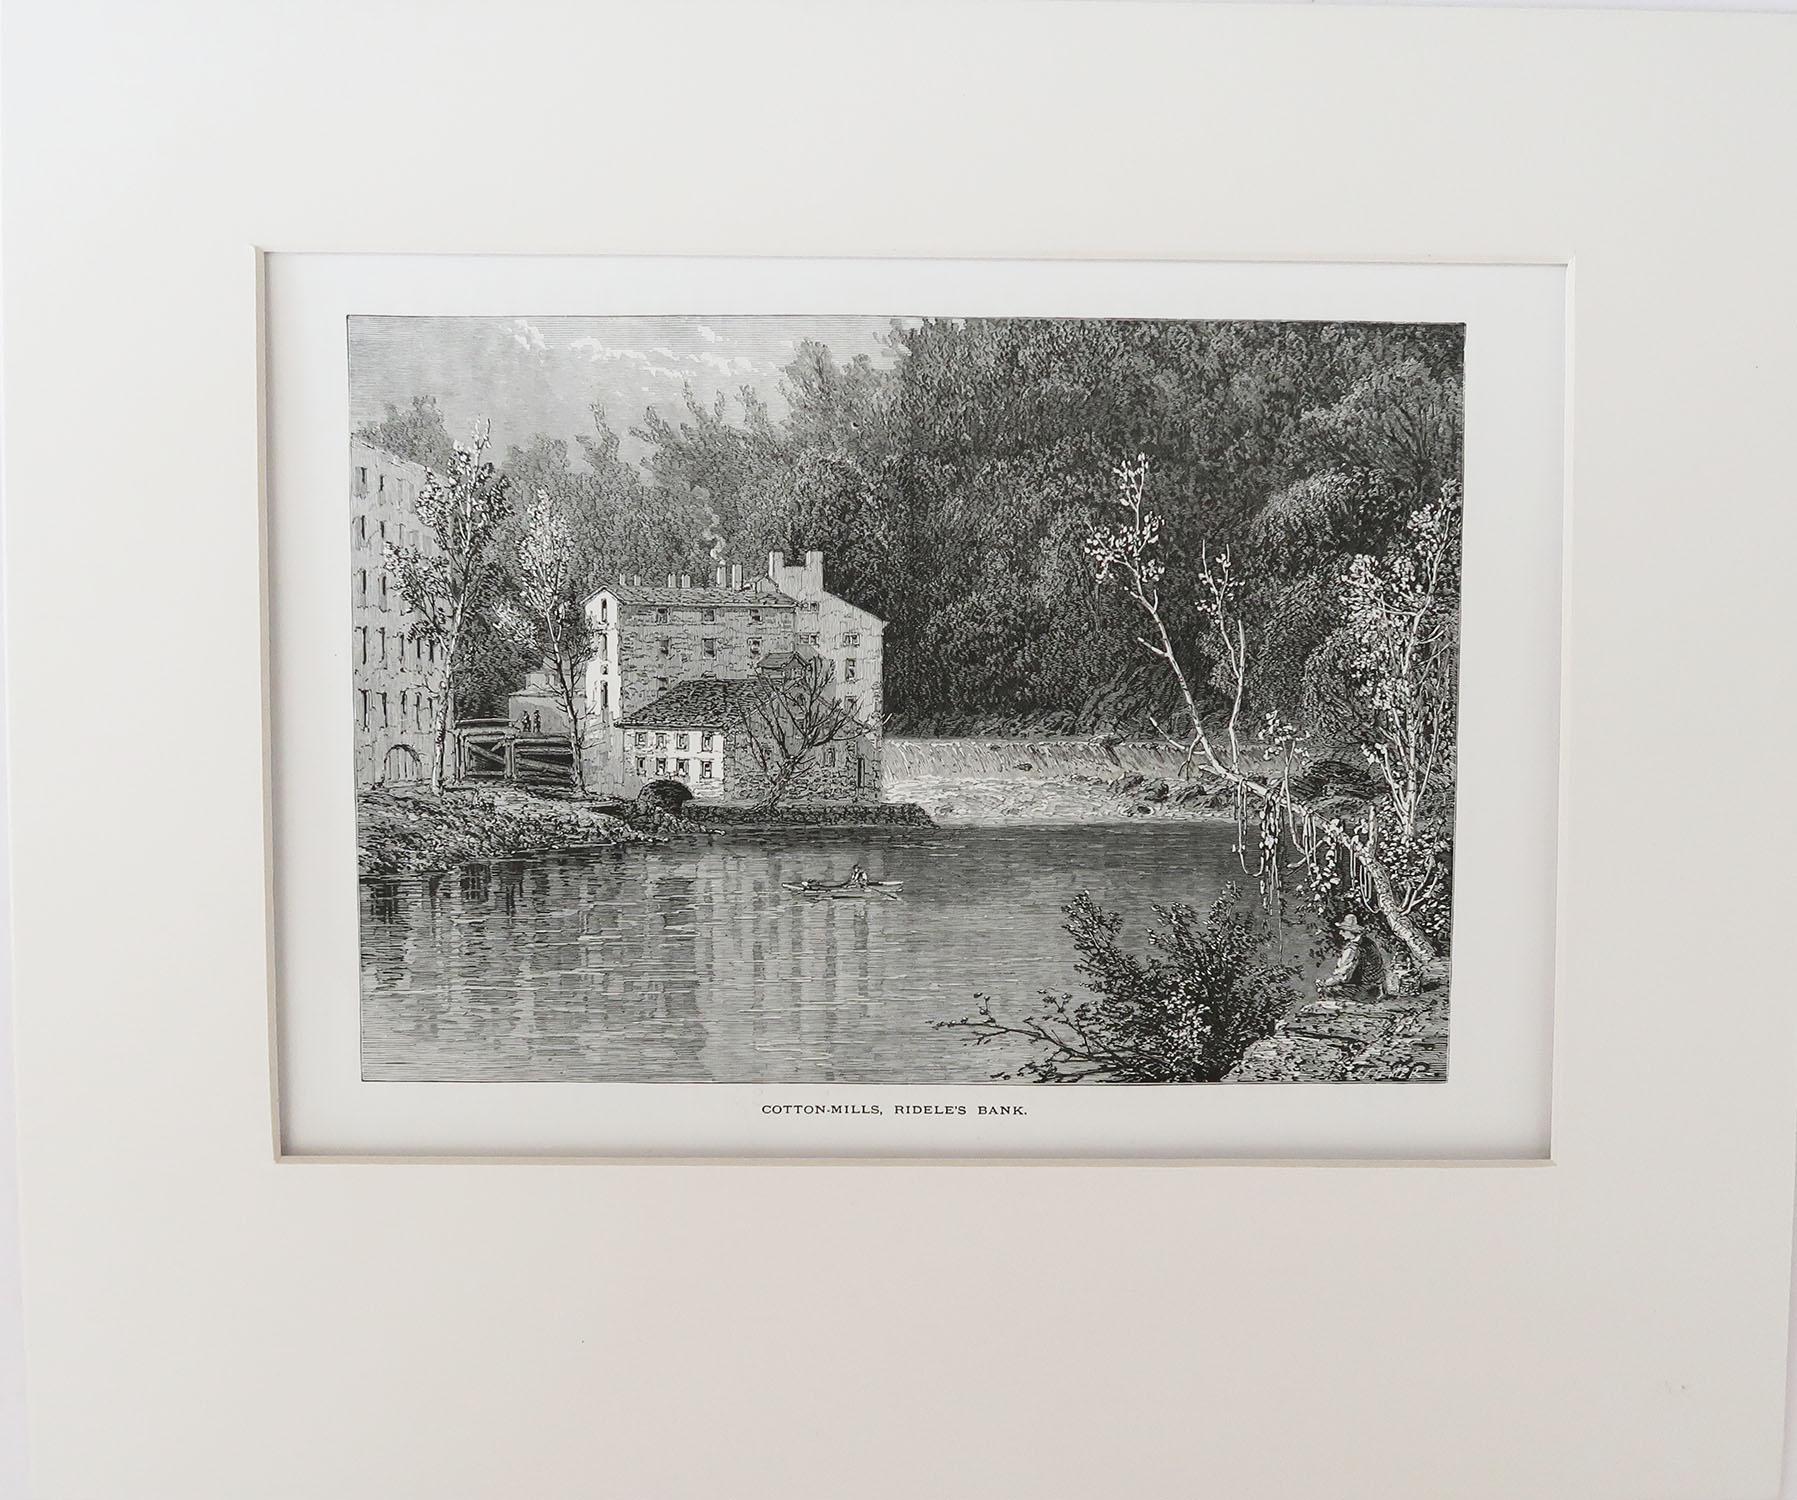 Great print of Rideles Bank Cotton Mills

Wood-cut engraving after the drawing by Harry Fenn

Published circa 1870

Matted or mounted in cream card

Unframed

The measurement below is the size of the card.
 